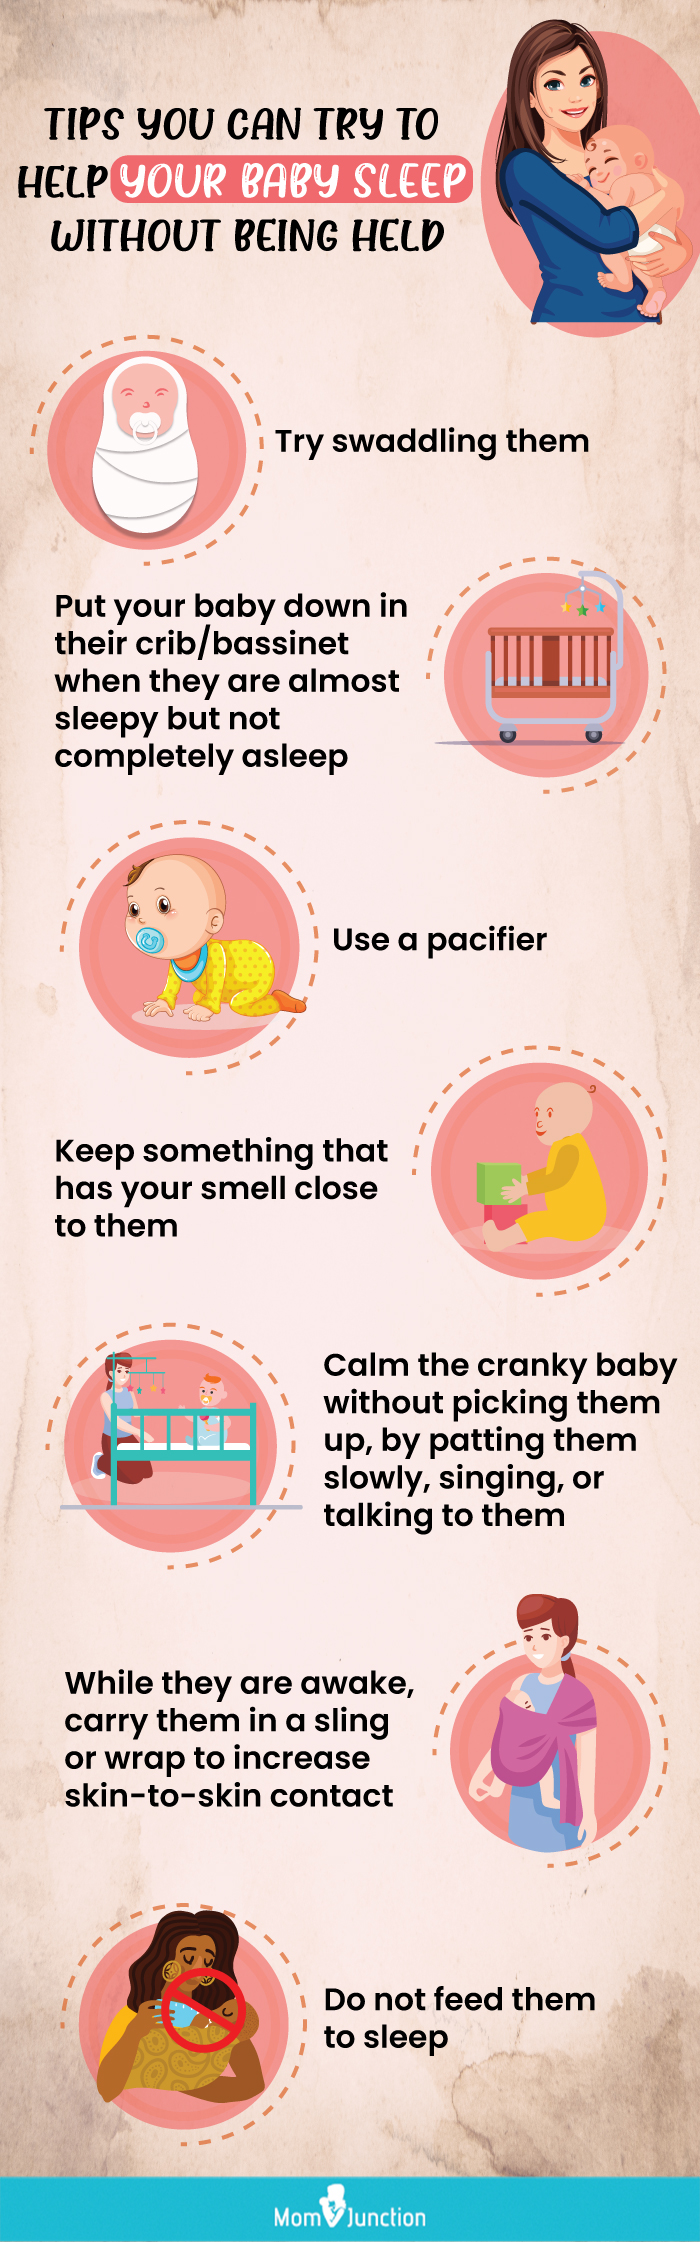 getting your baby to sleep without having to hold them (infographic)